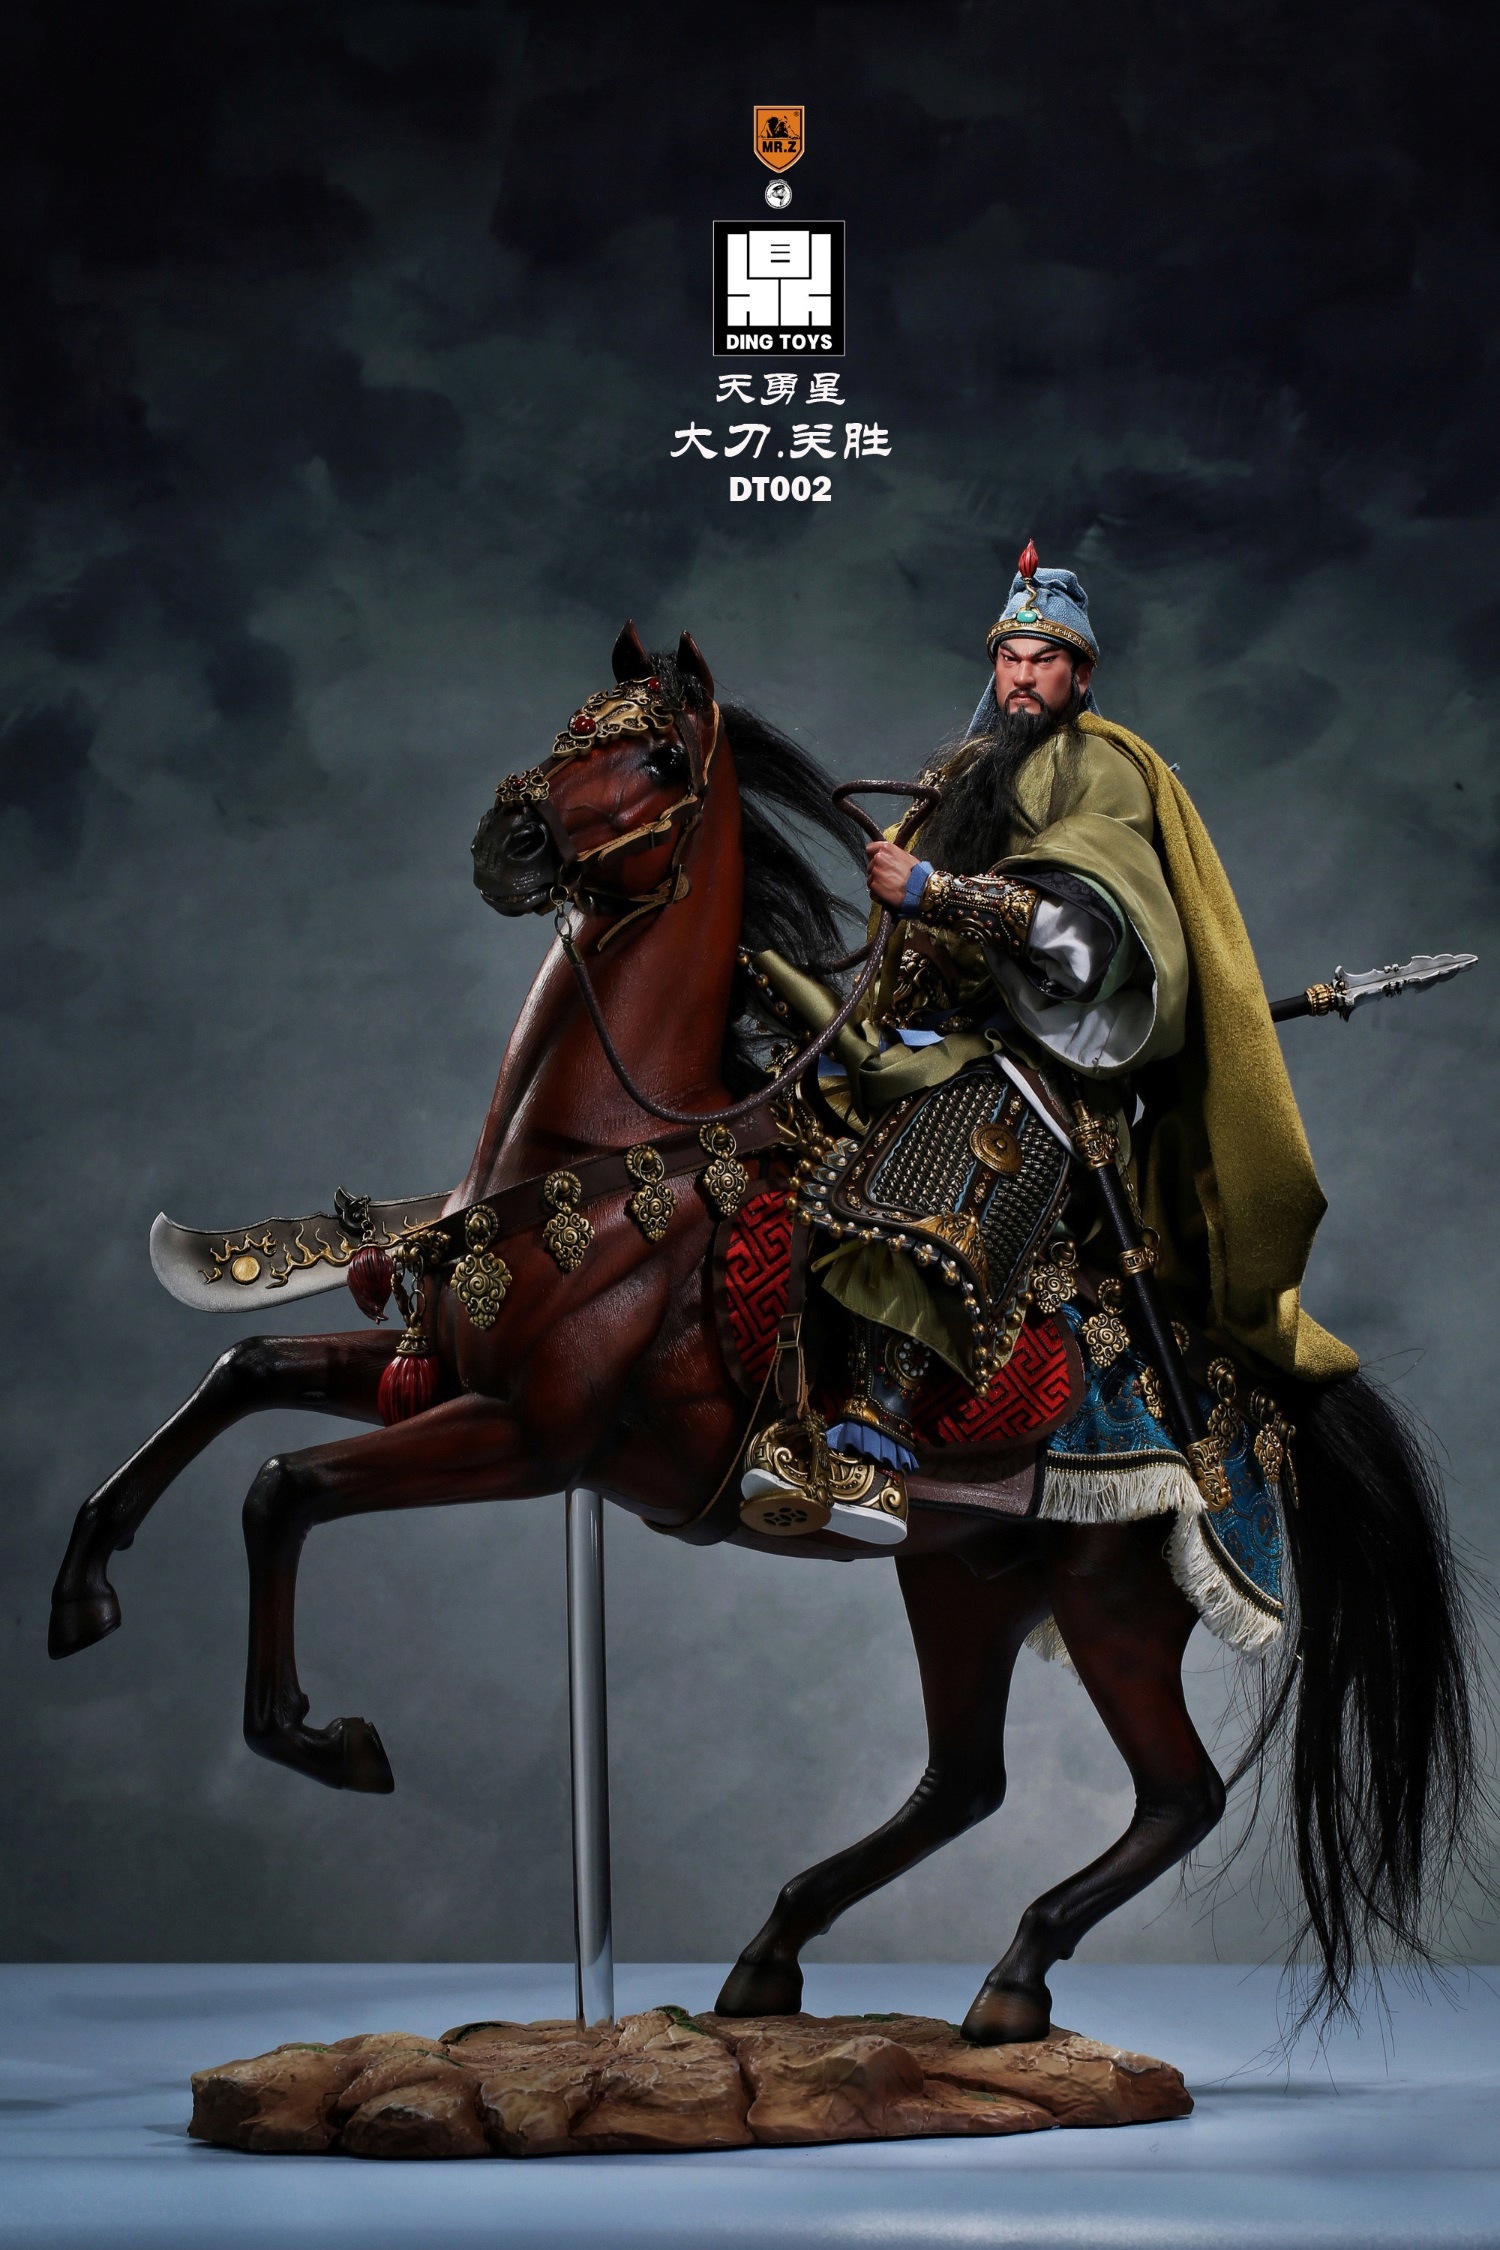 WaterMargin - NEW PRODUCT: Mr.Z x Ding Toys DT002 1/6 Scale 《Water Margin》Guan Sheng, War Horse 08153